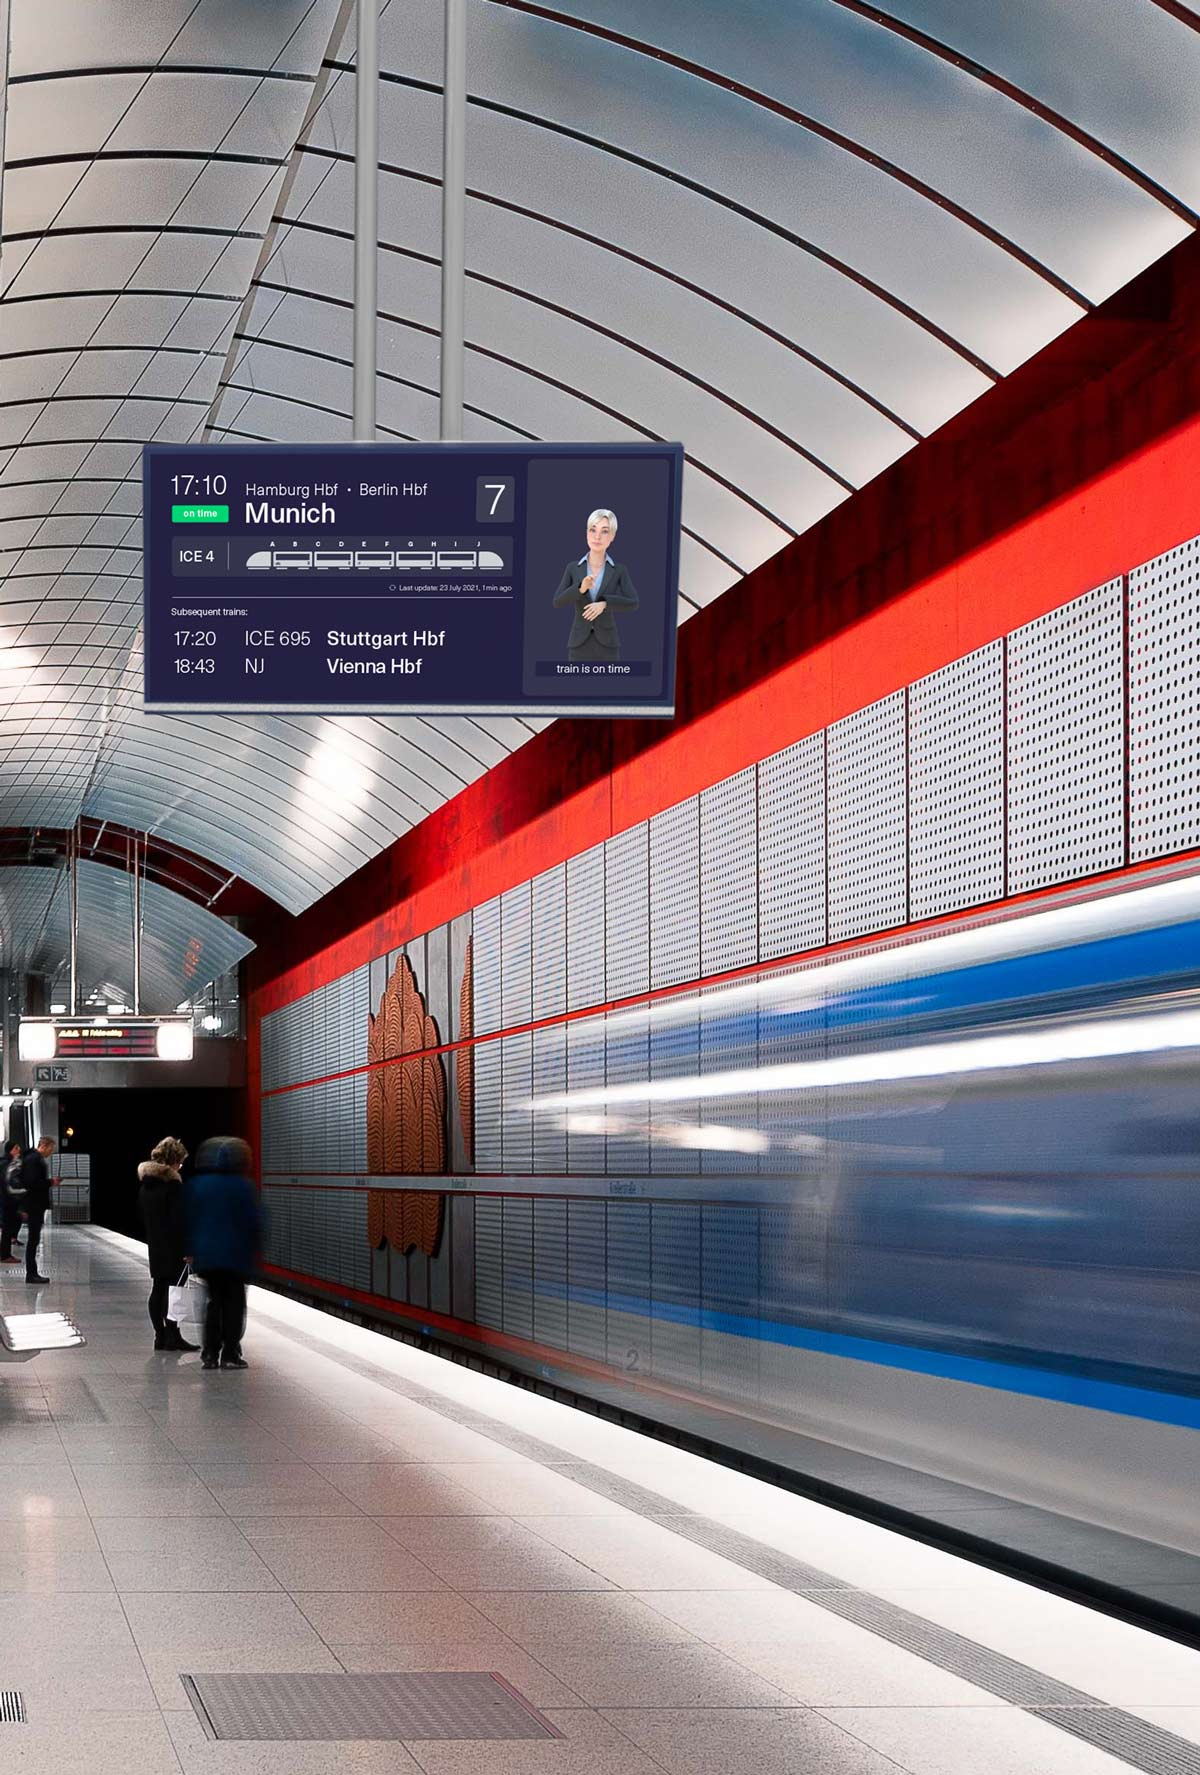 Header image showing a train station with a big display hanging from the ceiling. The display shows departure information, which are also translated by a sign language avatar.